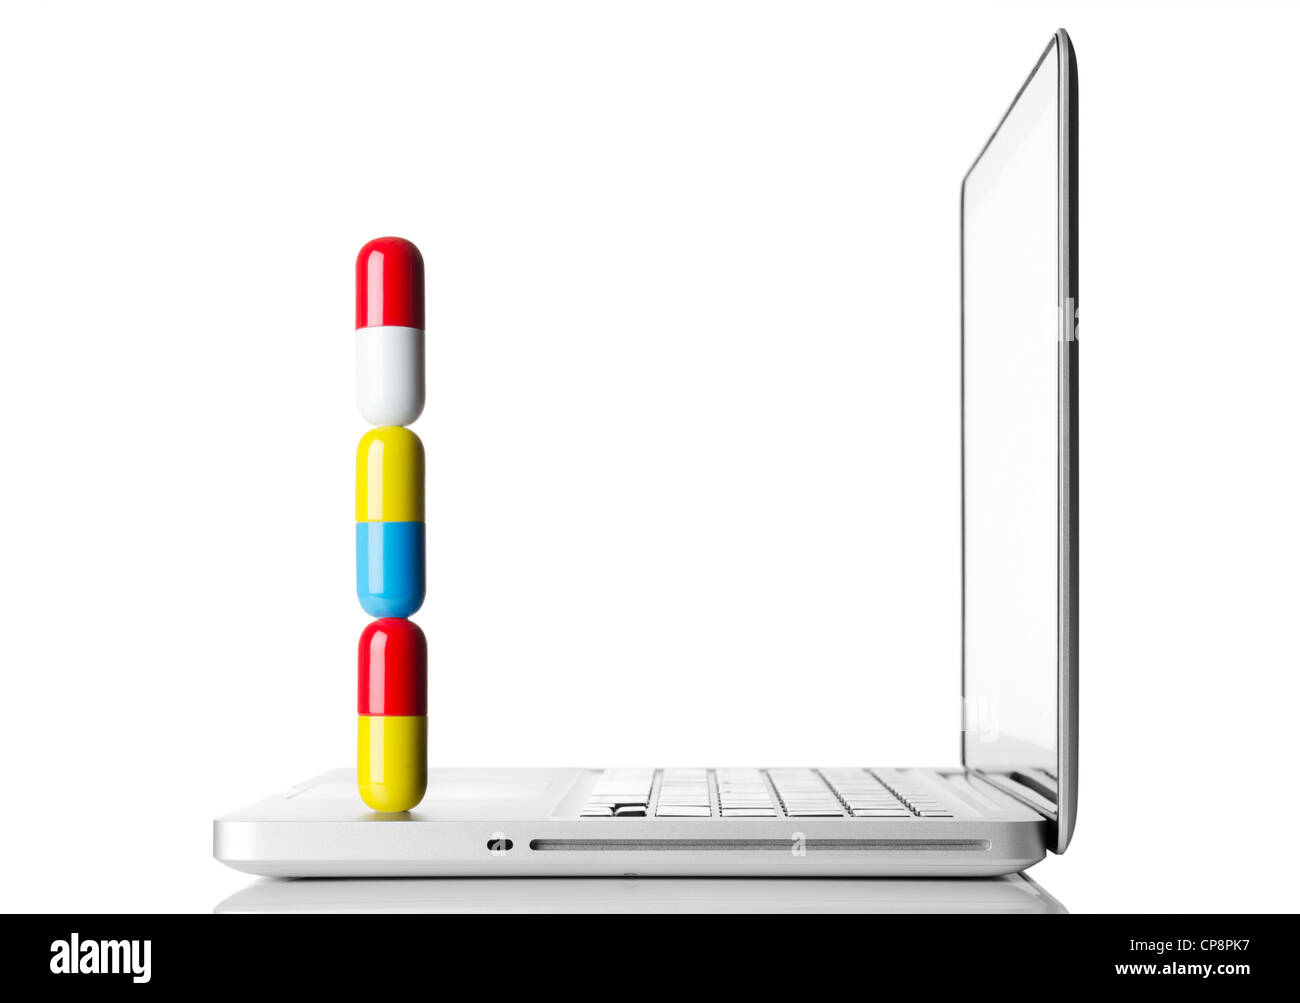 Large pills on a laptop computer Stock Photo